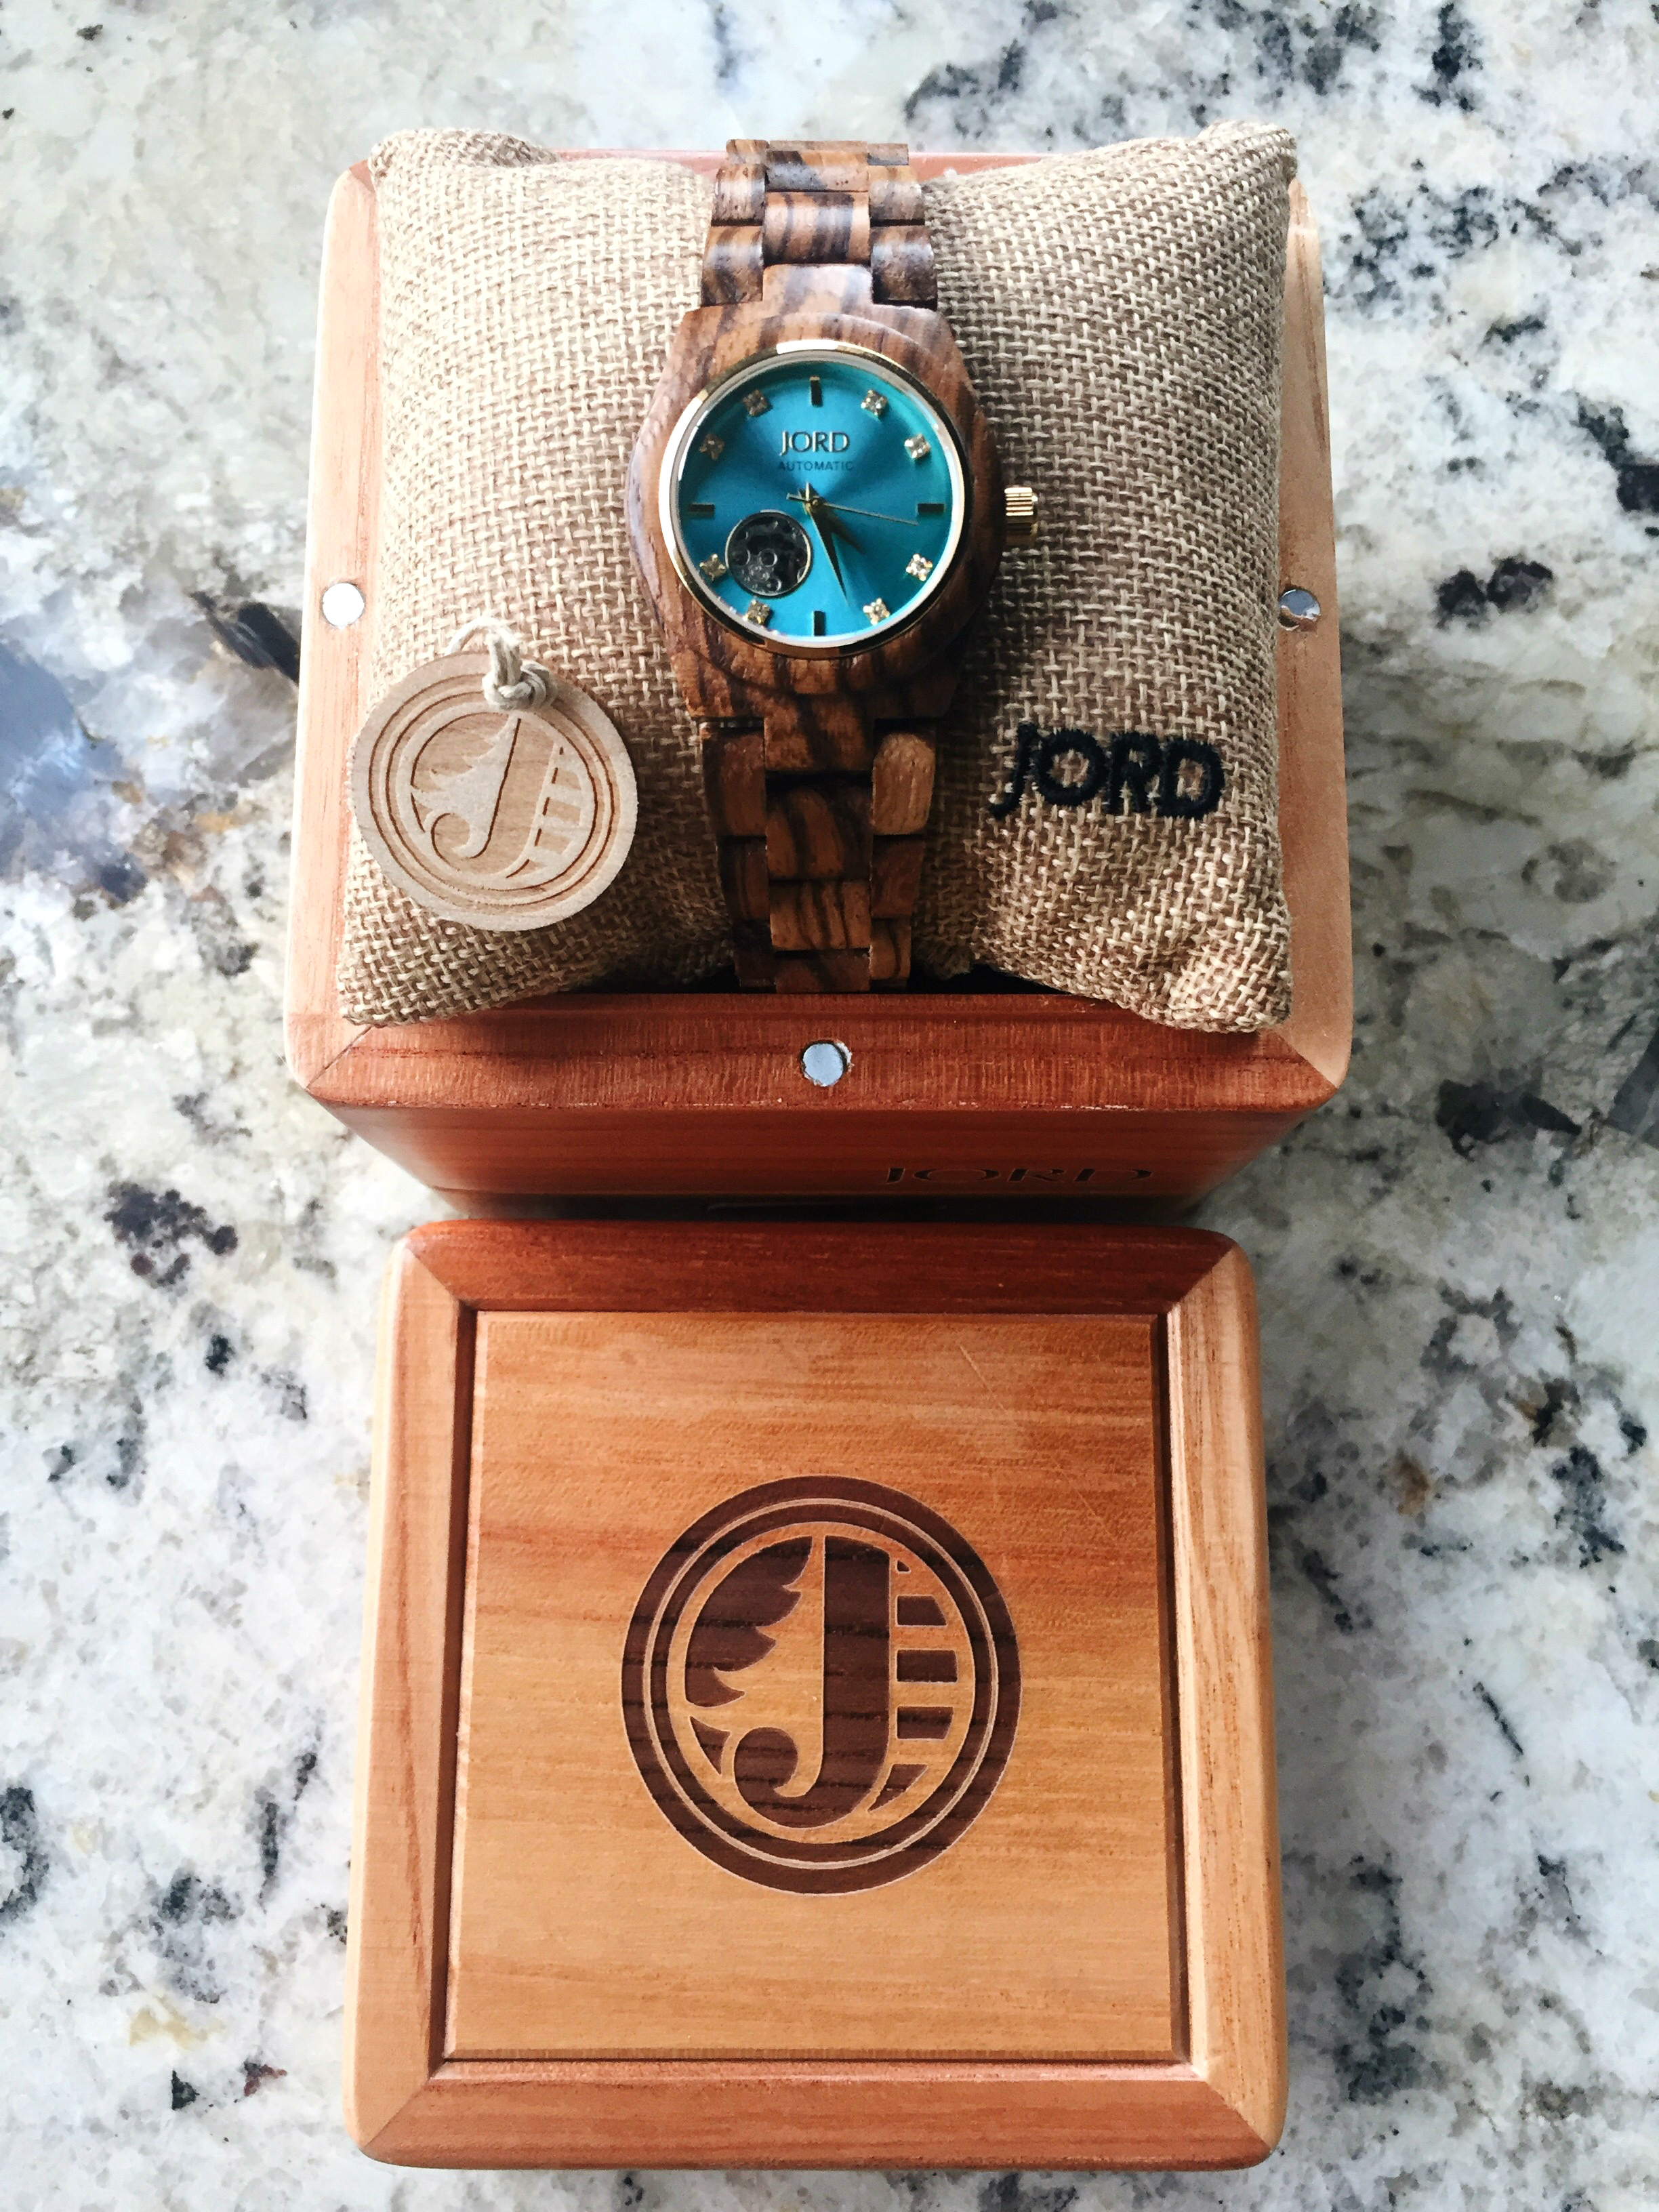 cora watch jord, wooden watches, cheap wooden watches, high quality watches, new watch companies